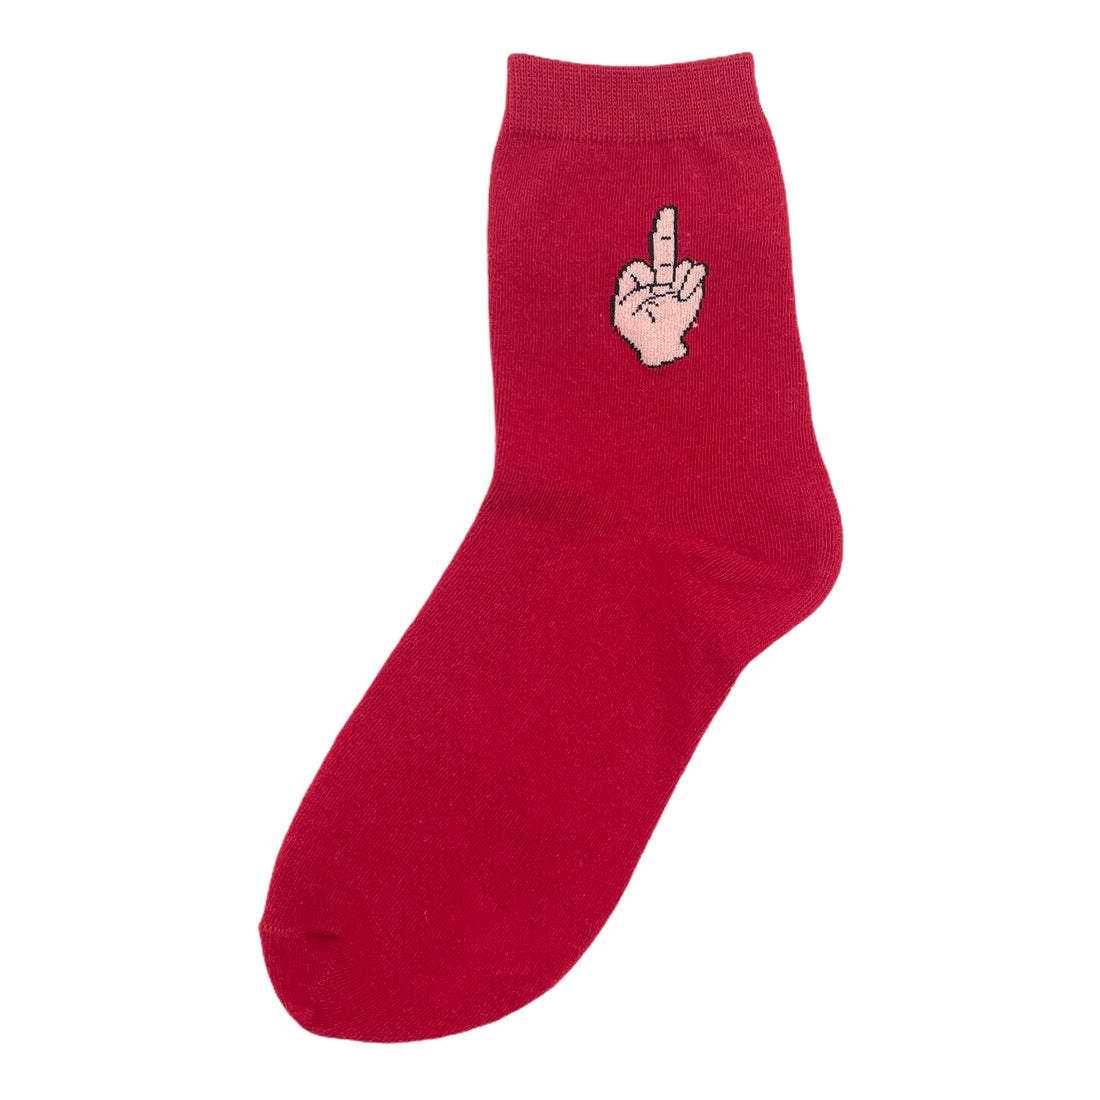 Berry red socks with finger graphic